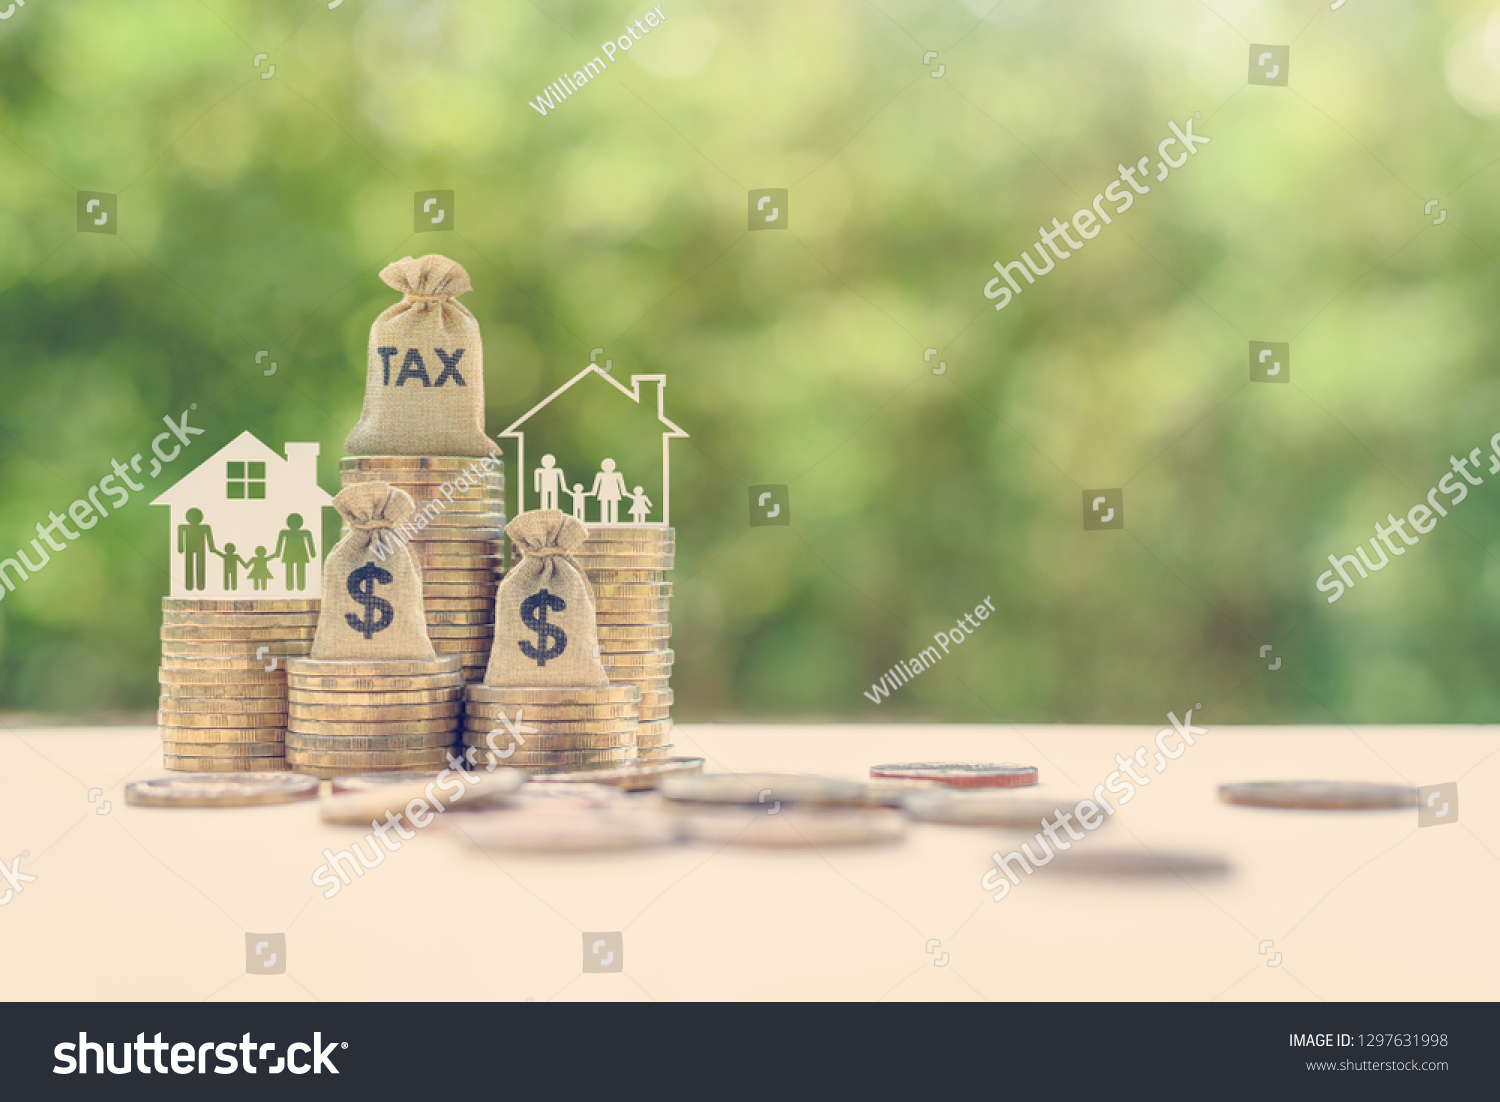 Family tax benefit / residential property or estate tax concept : Tax burlap bag, family members, house on rows of coin money, depicts mandatory financial charge / type of levy imposed upon a taxpayer #1297631998